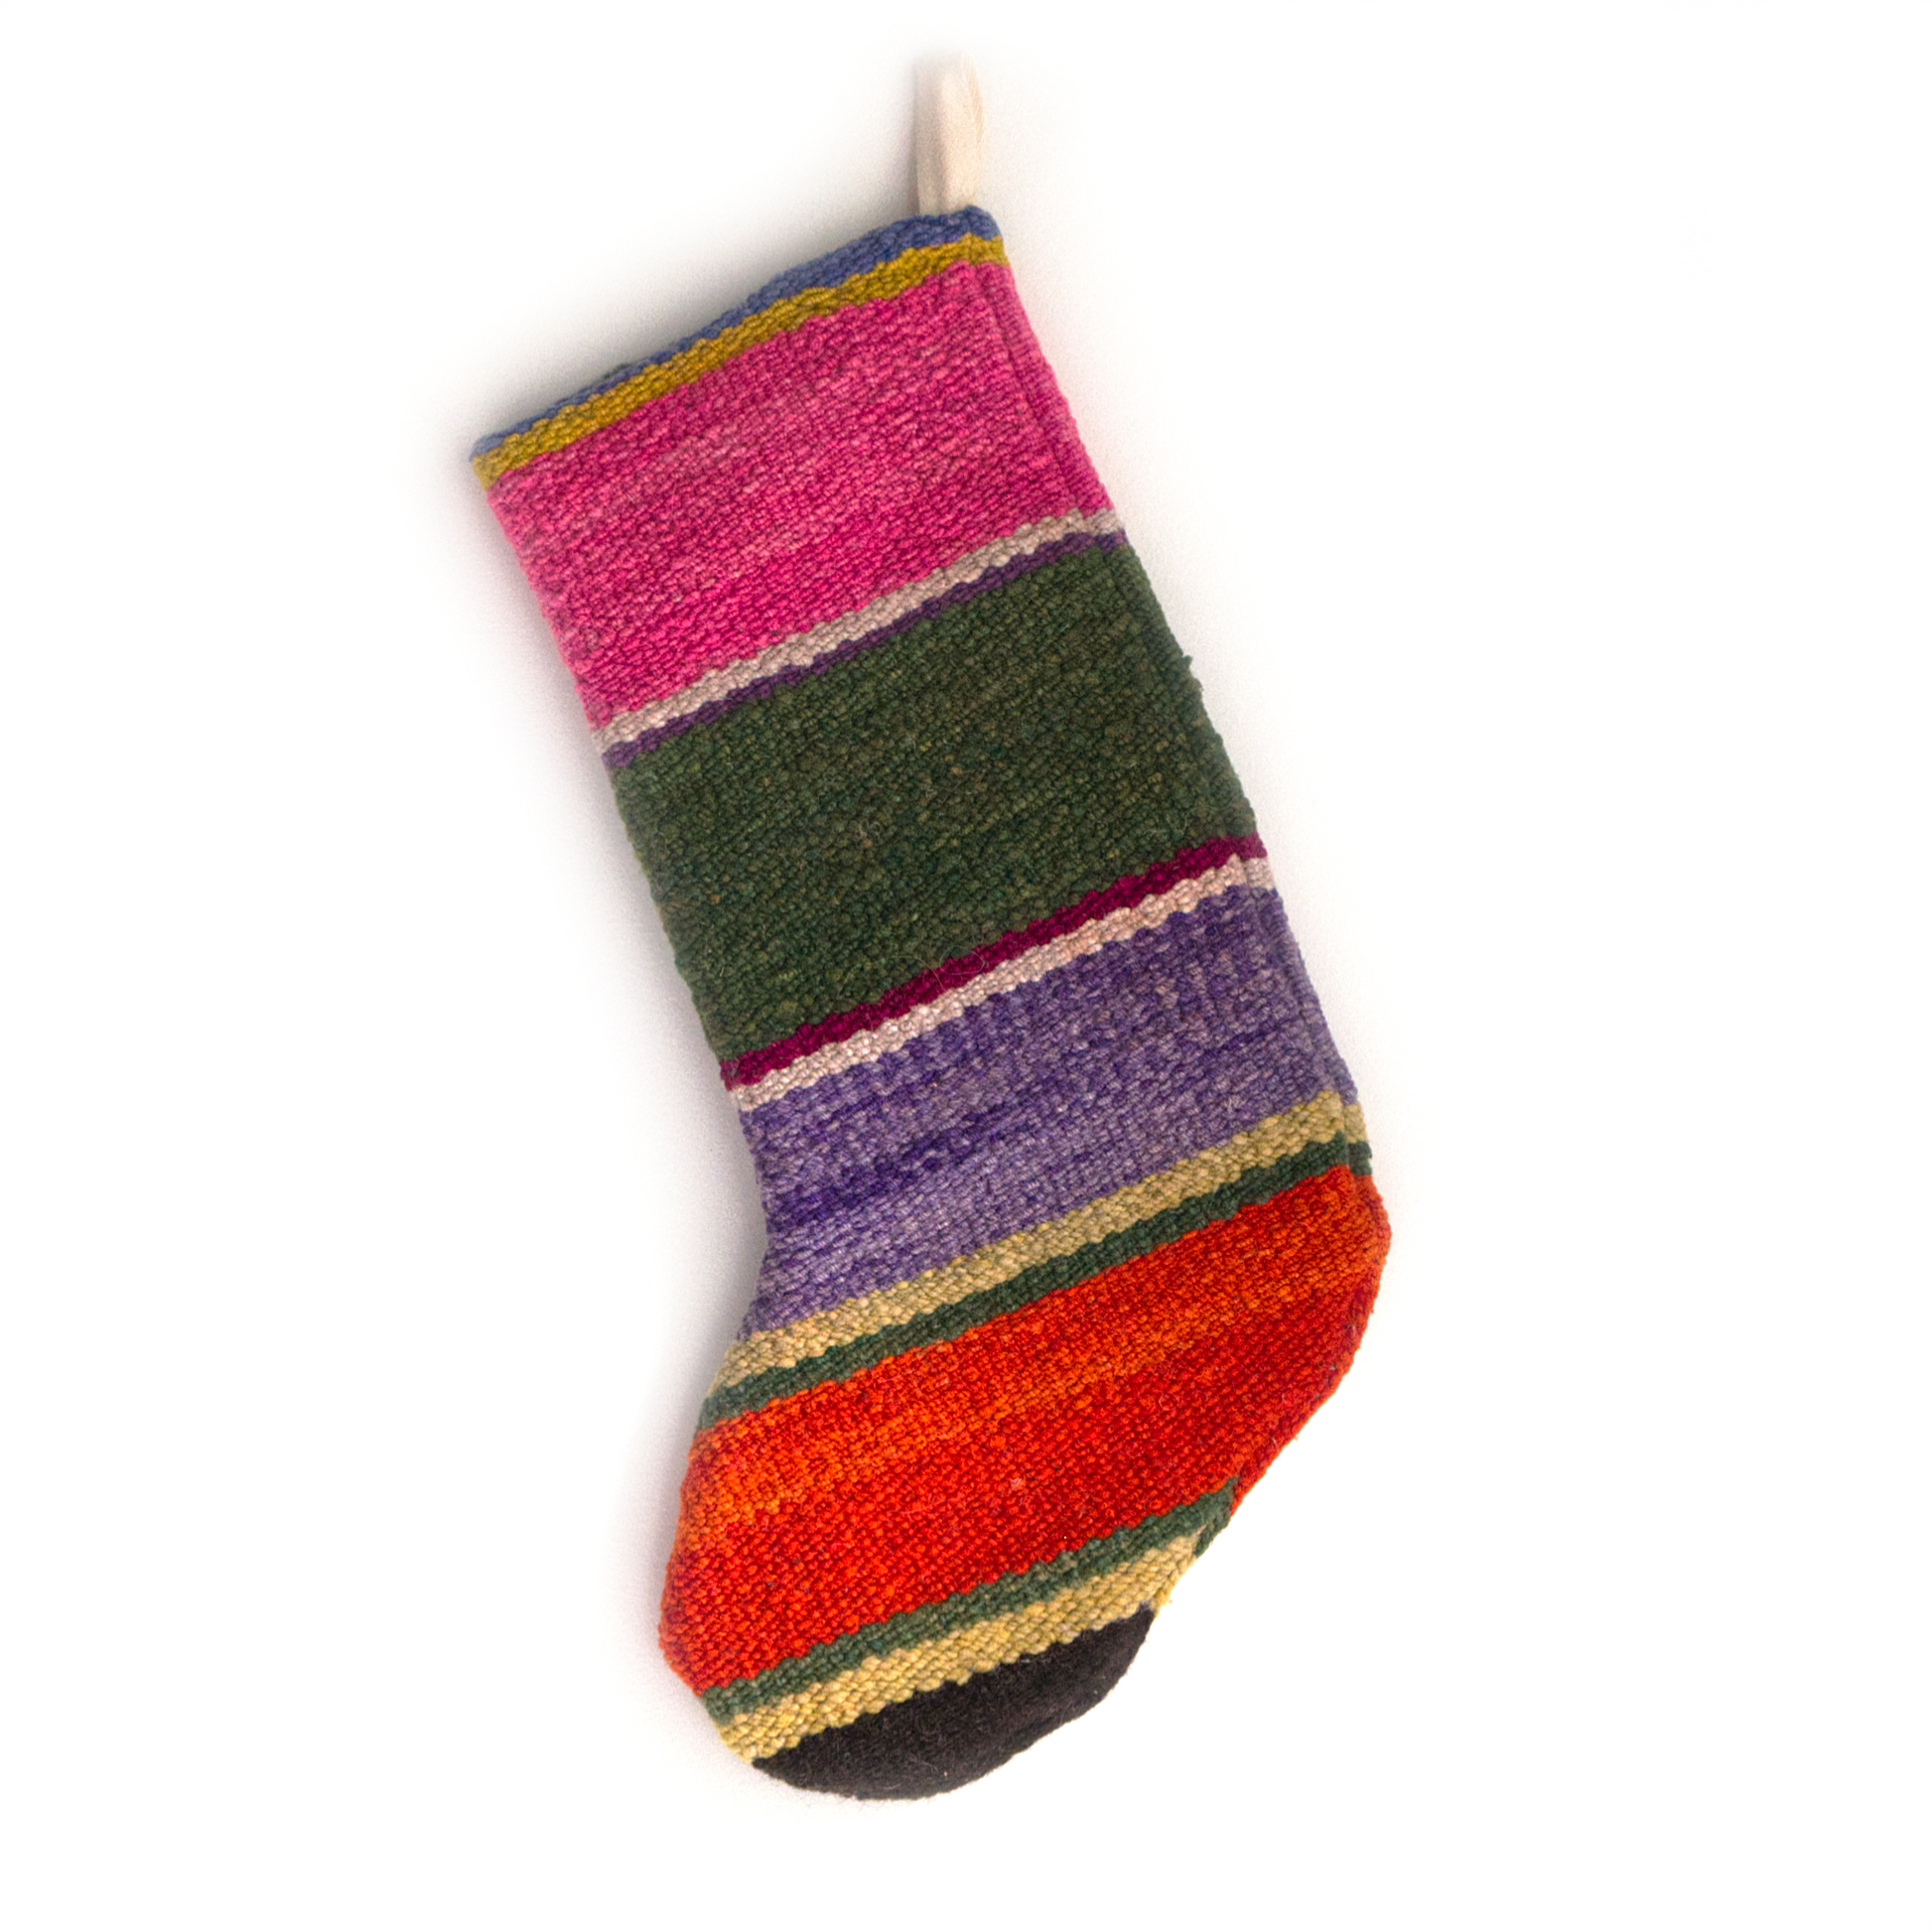 Intiearth_Peruvian_Frazada_Christmas_Stocking_no_9_multicolor_bright_and_colorful_one_of_a_kind.png